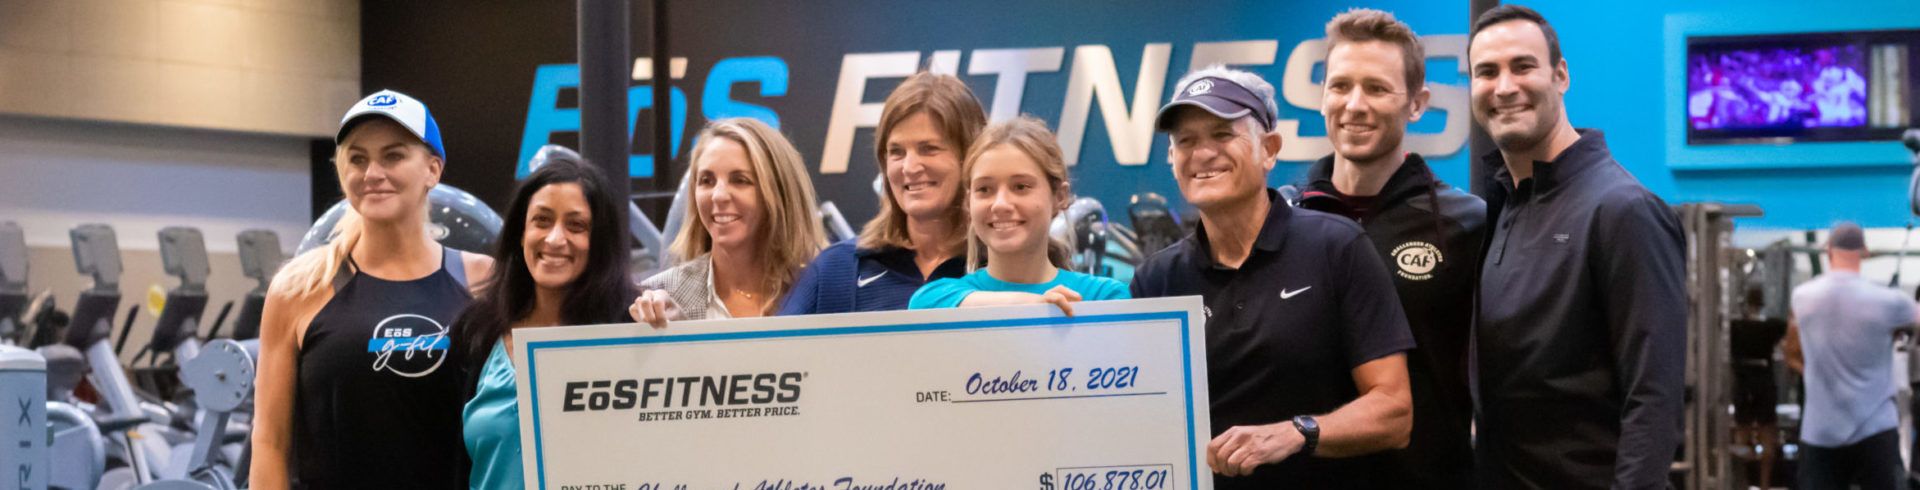 Challenged Athletes Foundation and EoS Fitness Check Presentation